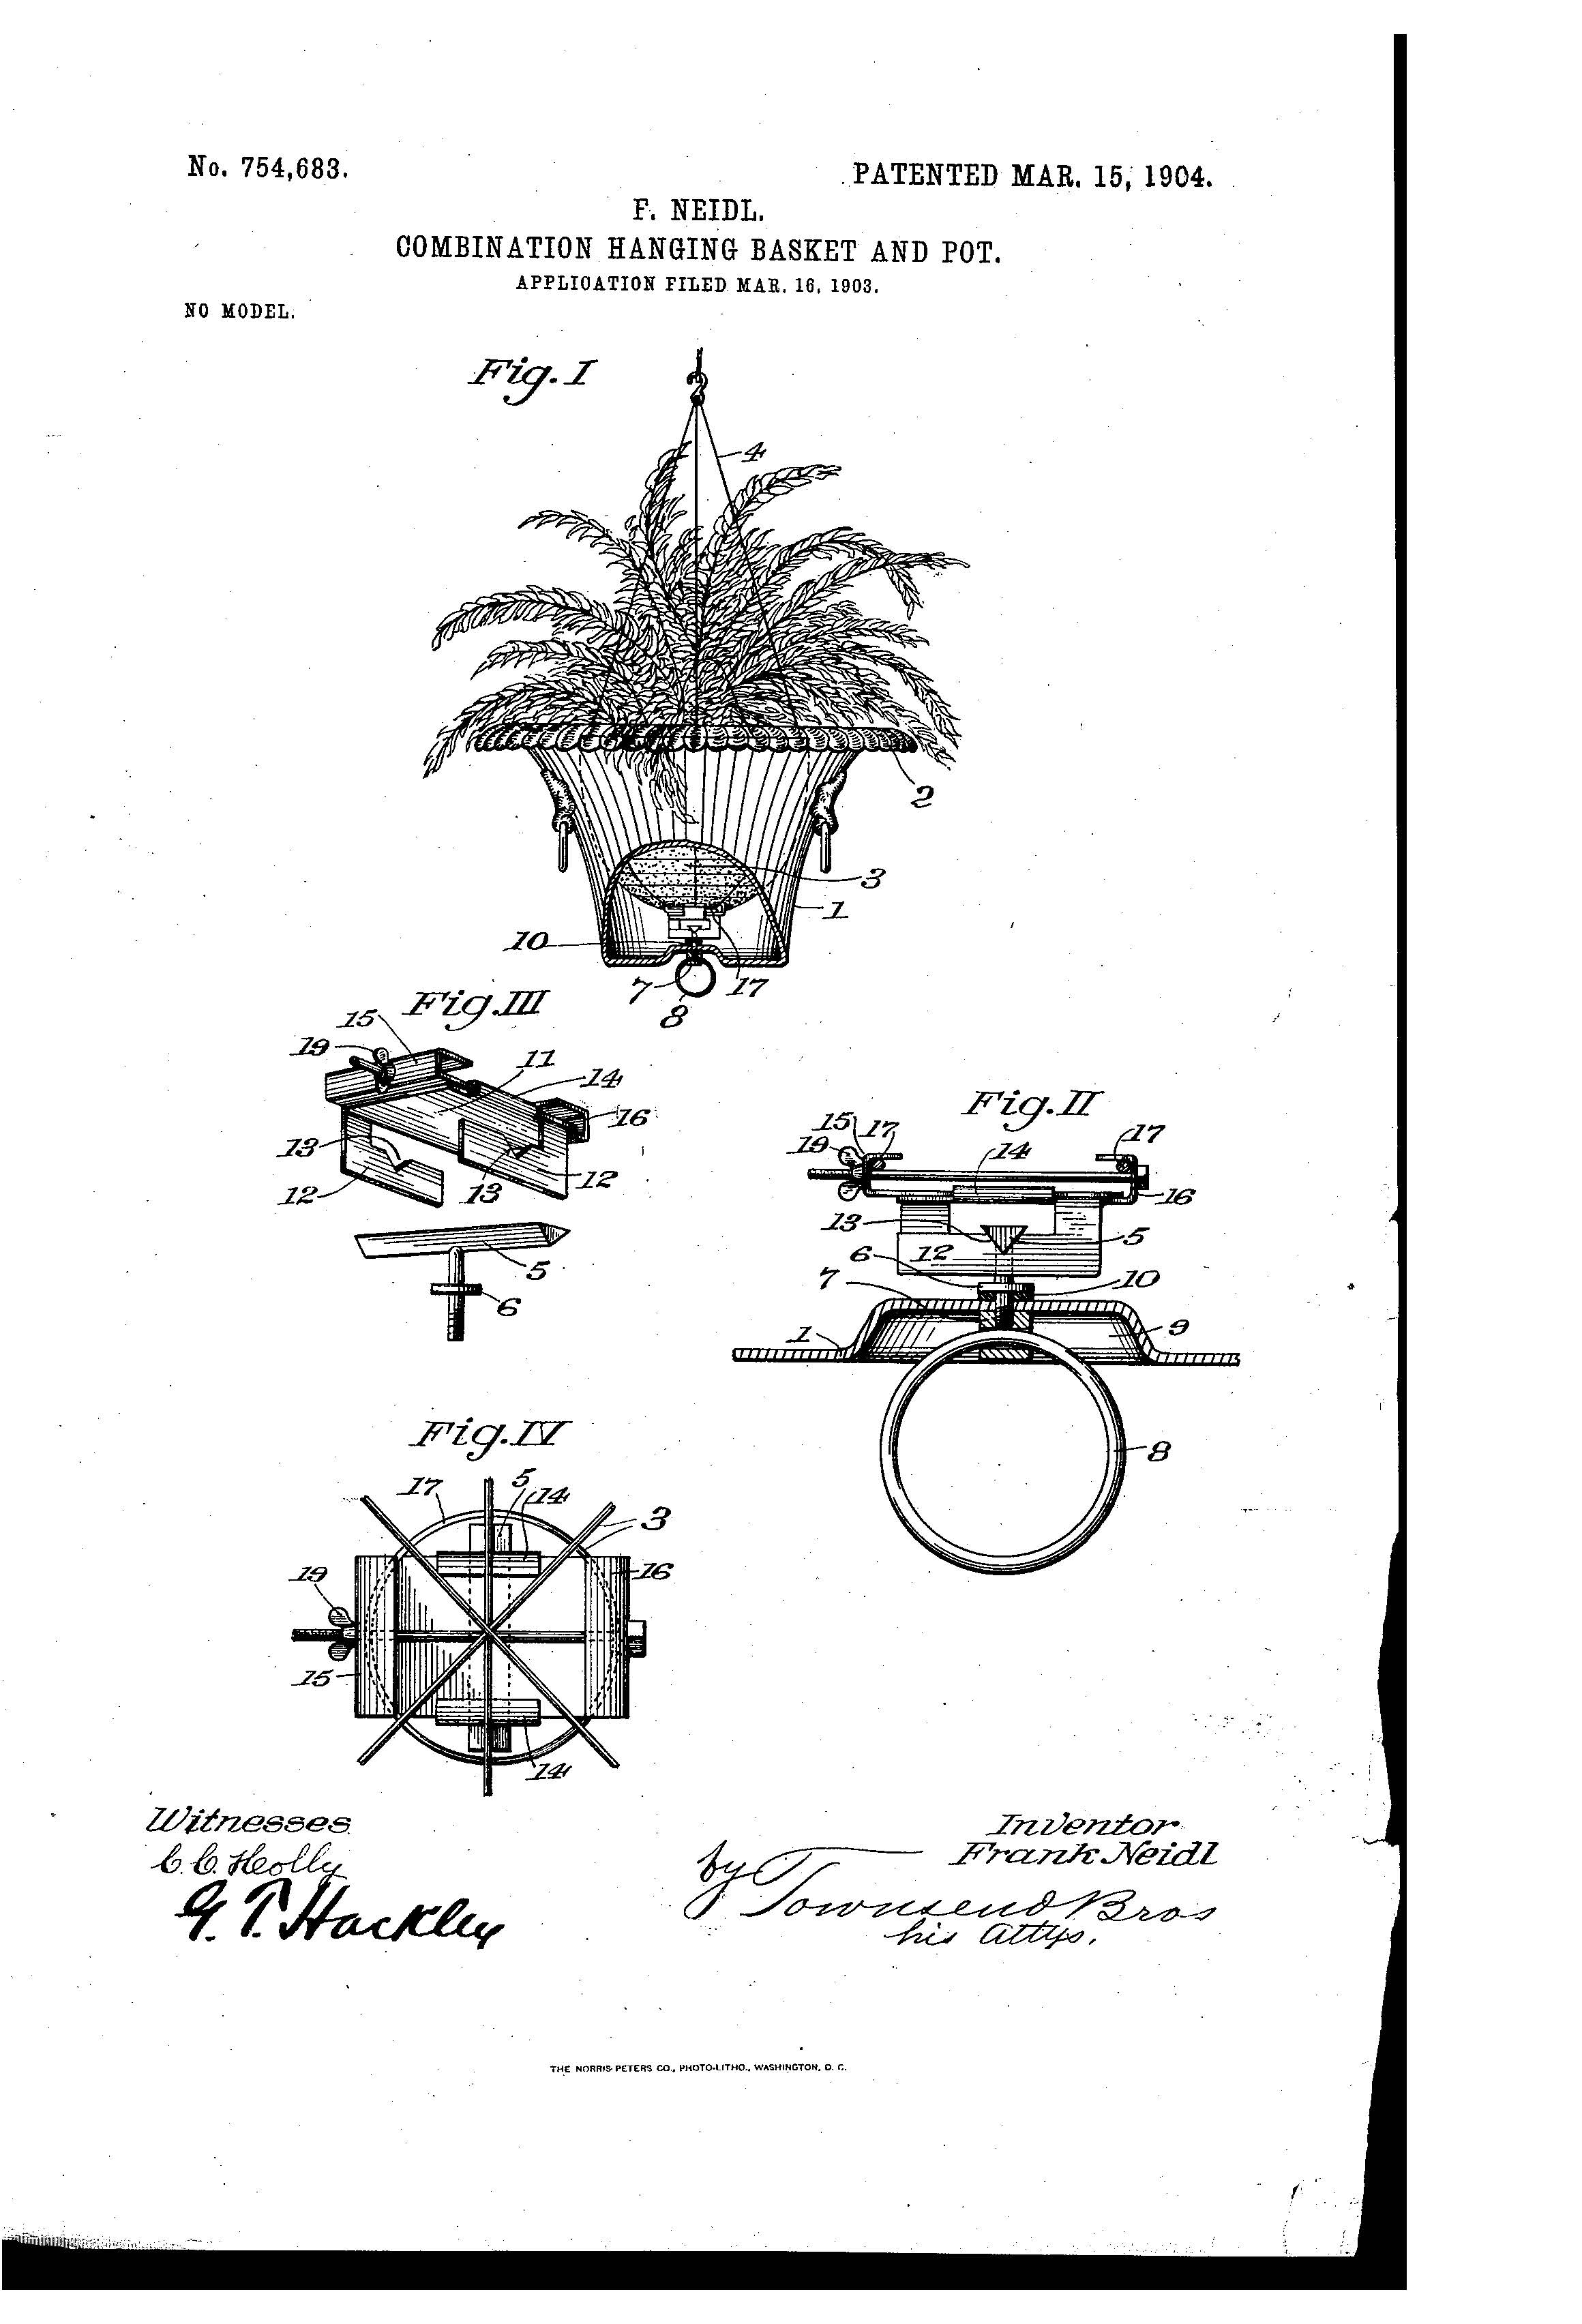 Patent-Illustration-Combined-Hanging-Basket-and-Pot